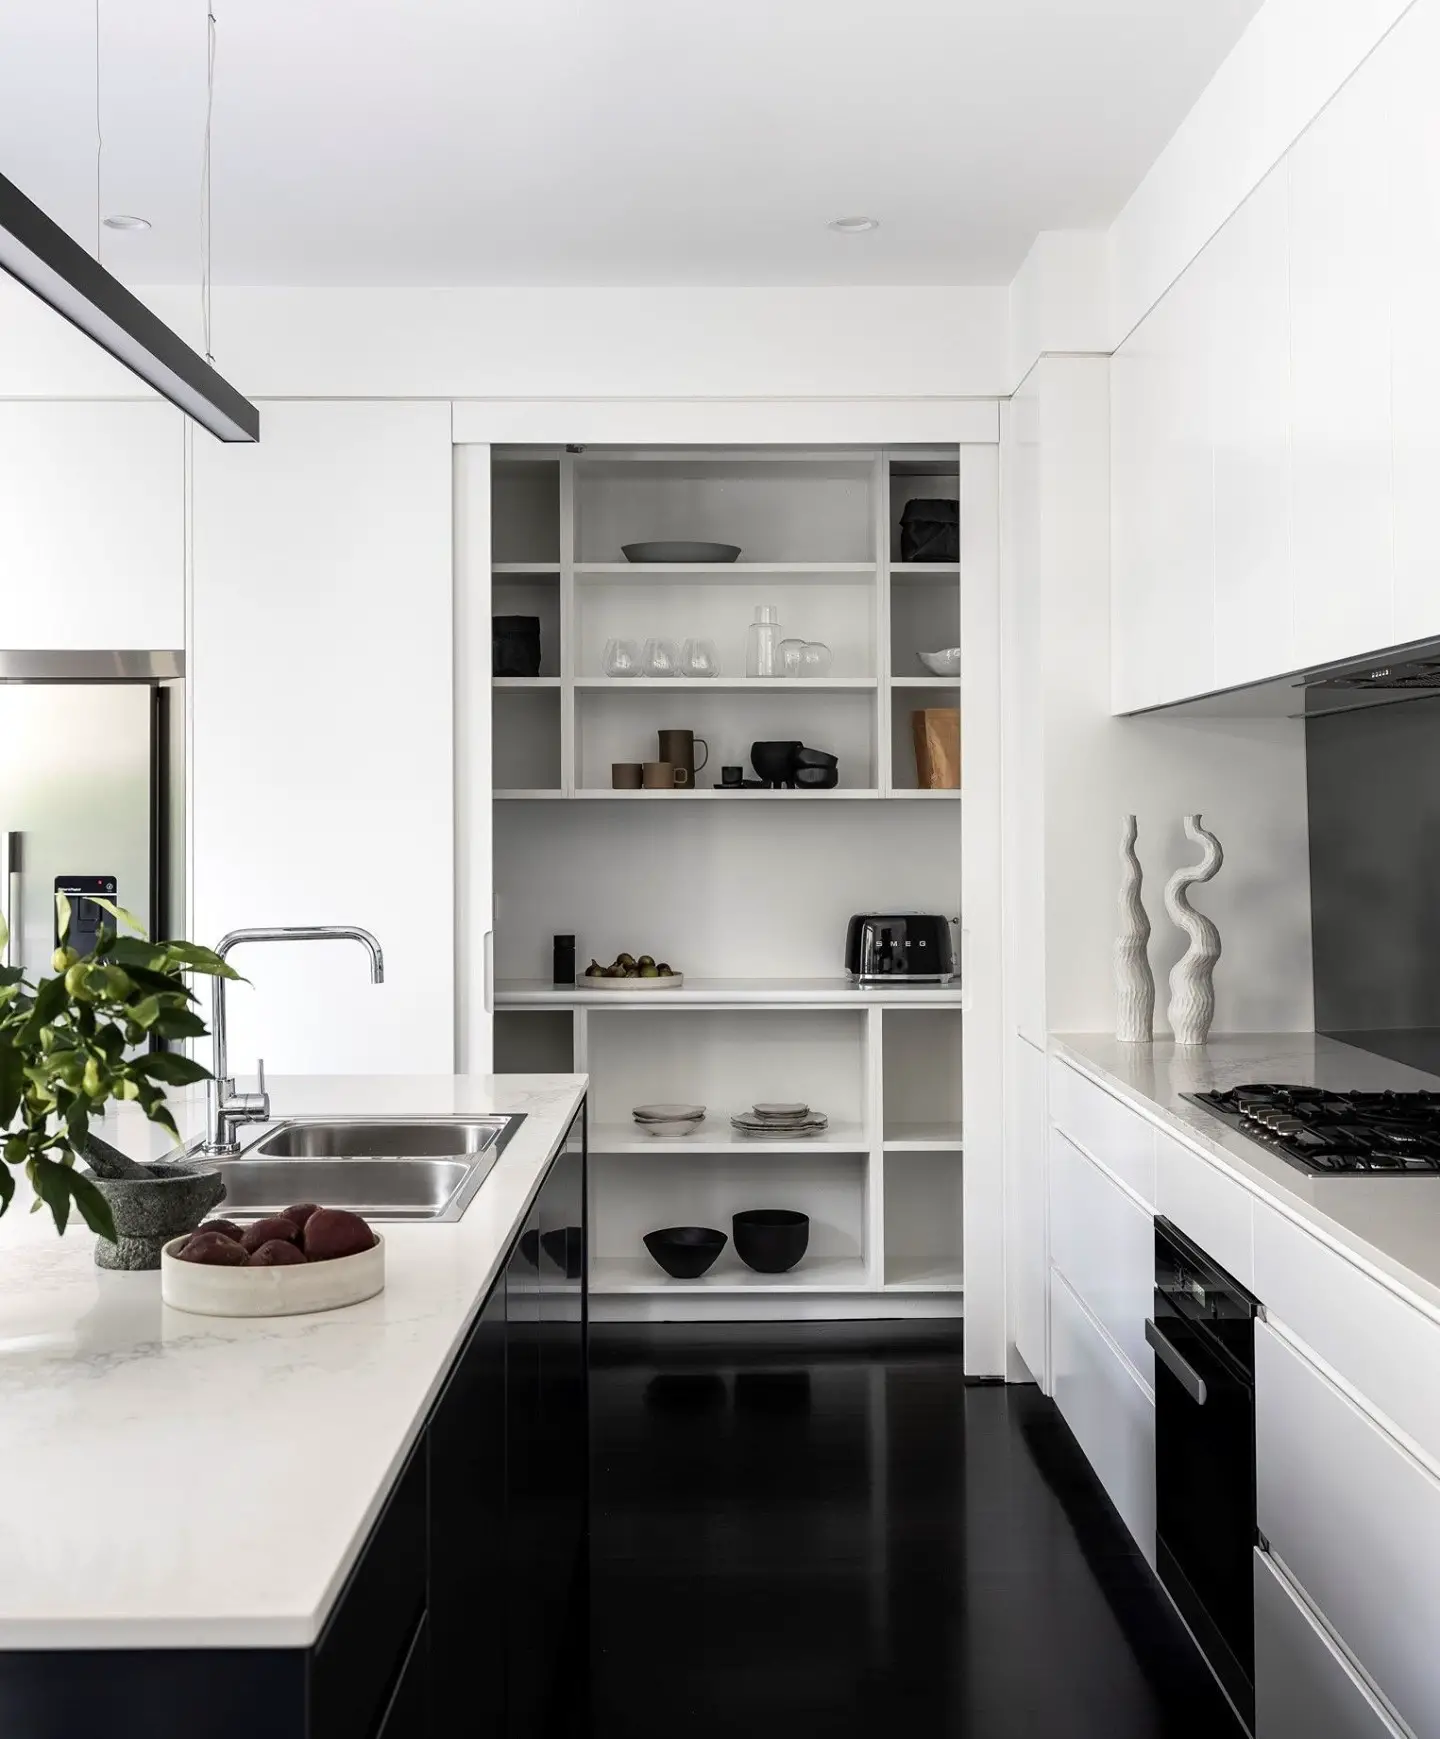 A modern kitchen with white cabinets and black counter tops.